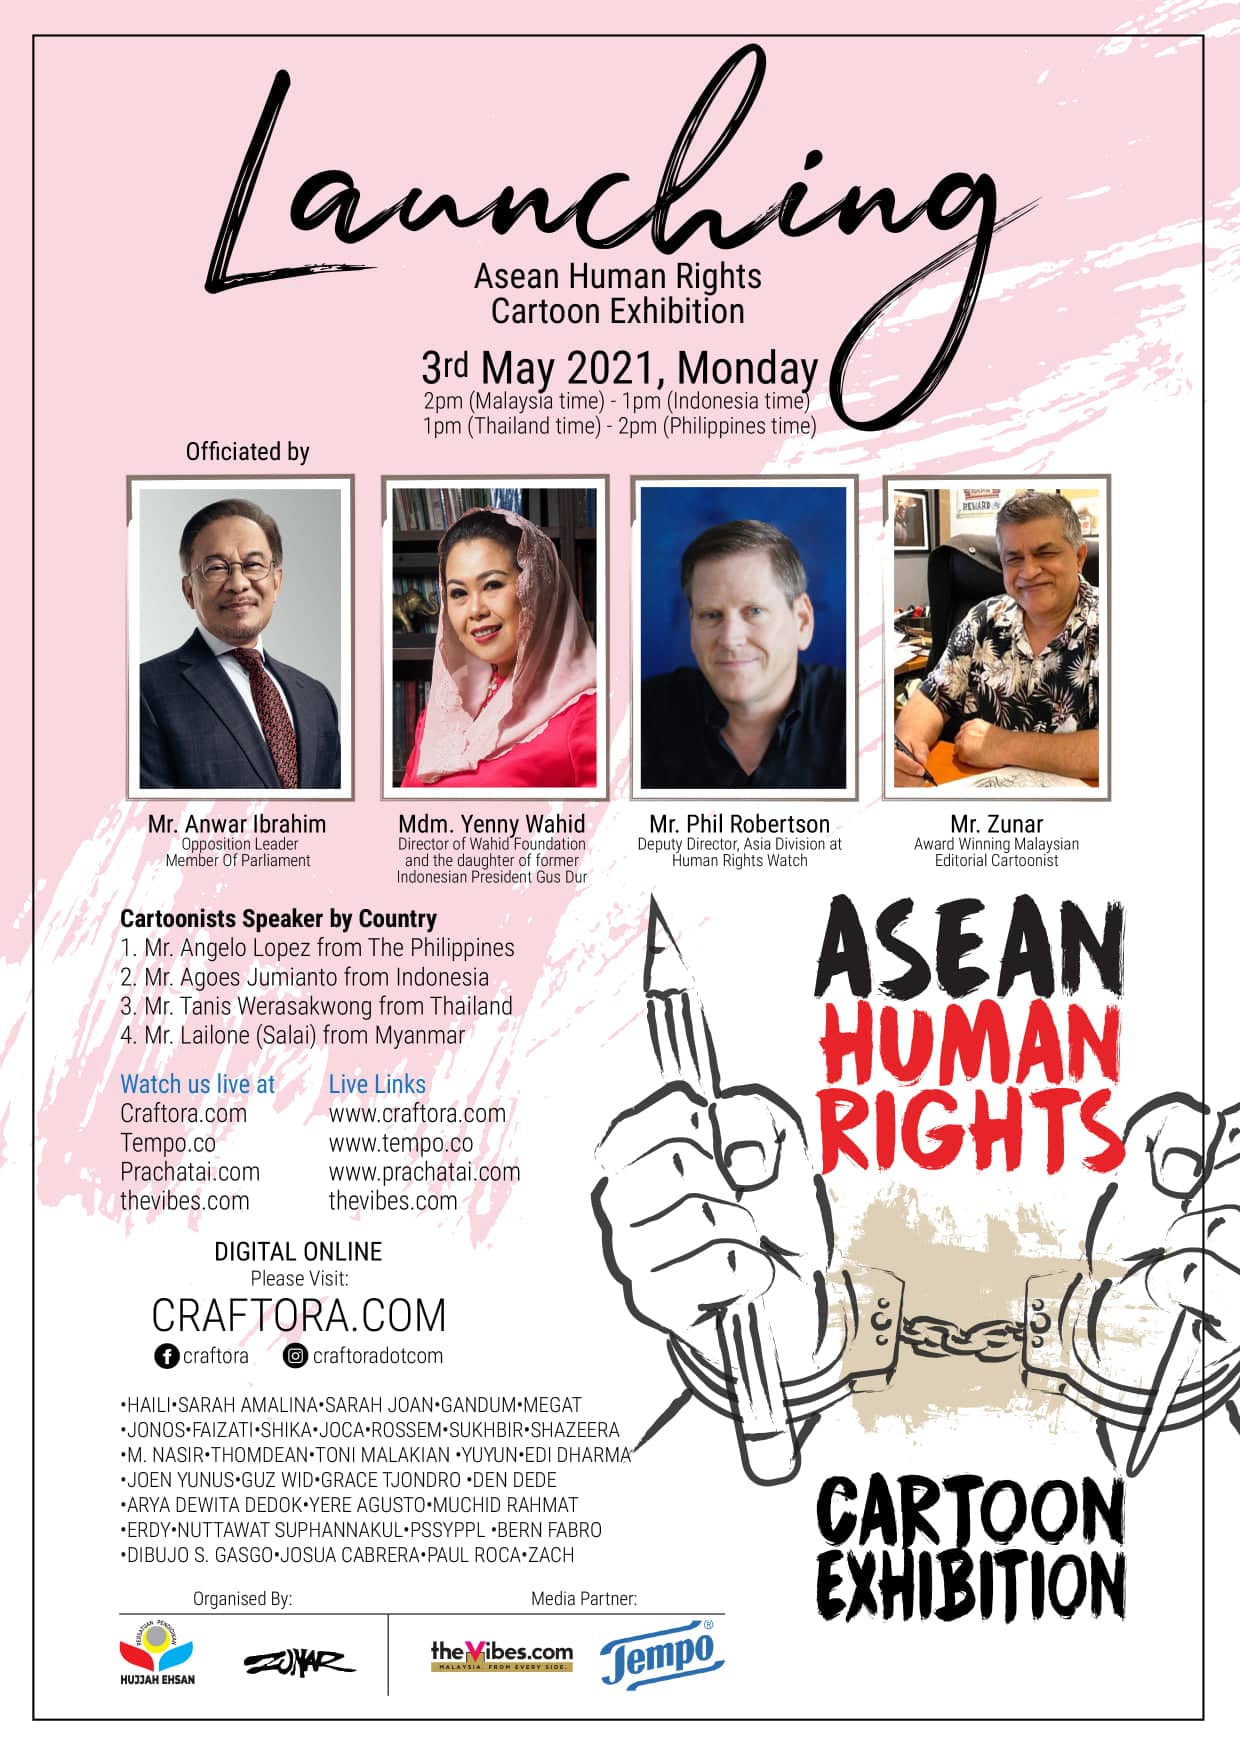 Asean Human Rights
Cartoon Exhibition

3rd May 2021, Monday

2pm (Malaysia time) - 1pm {Indonesia time}
1pm (Thailand time) - 2pm (Philippines time)
Officiated by

Cartoonists Speaker by Country

1. Mr. Angelo Lopez from The Philippines
2. Mr. Agoes Jumianto from Indonesia

3. Mr. Tanis Werasakwong from Thailand
4. Mr. Lailone (Salai) from Myanmar

Watch us live at Live Links
Craftora ci

Tempo.co

Prachatai.com W.
thevibes.com thevibes.com

DIGITAL ONLINE

Please Visit

CRAFTORA.COM
Oo a @ craftoracotcom